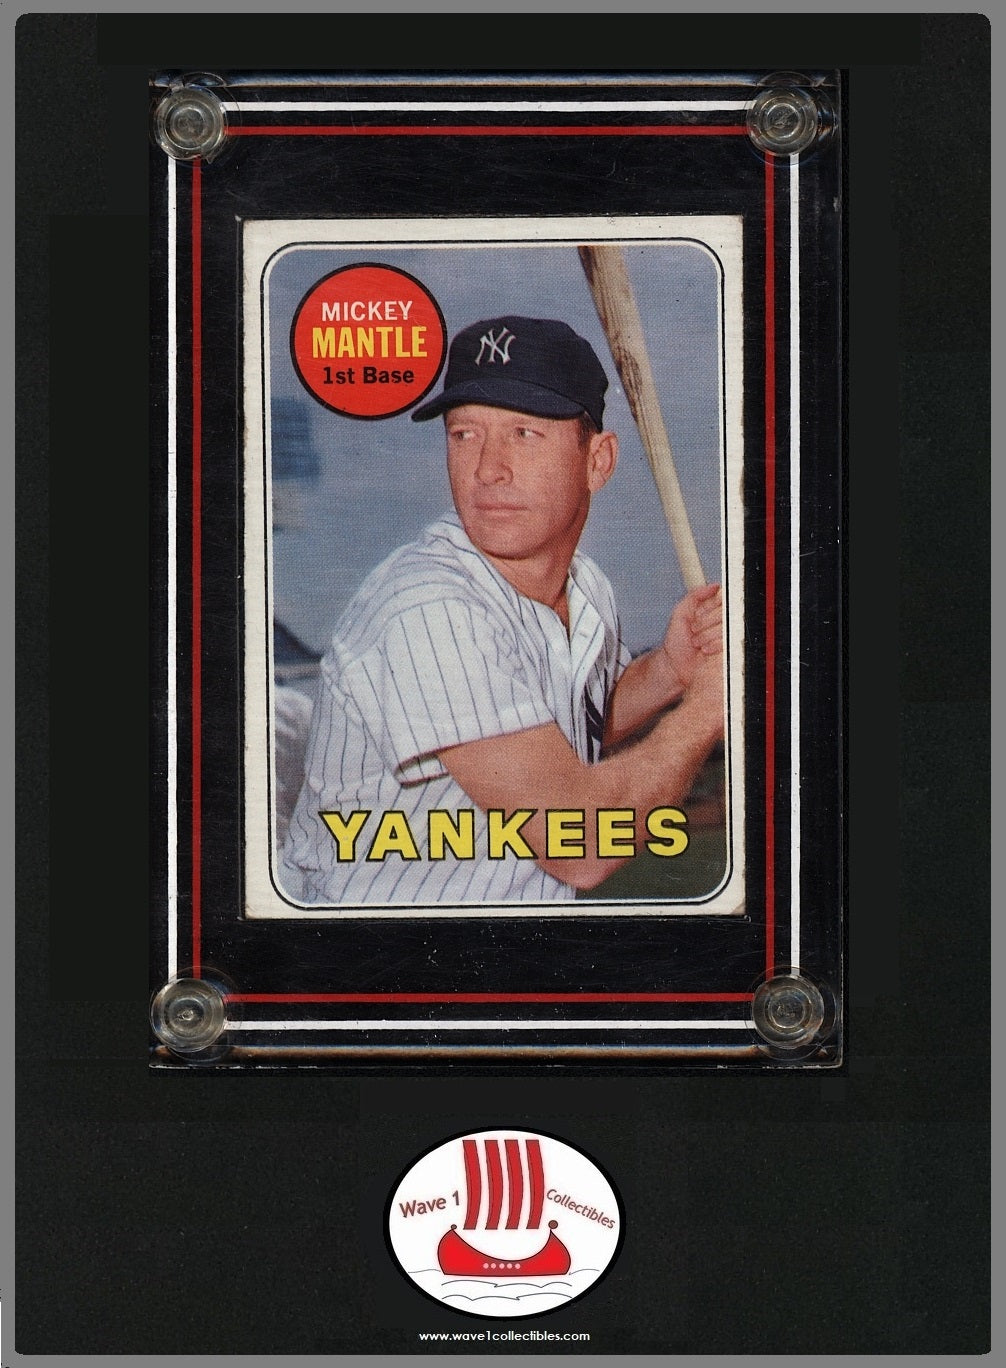 Mickey Mantle Retirement Year Card | Topps Baseball 1969 #500 Approximate Grade VG-EX 4